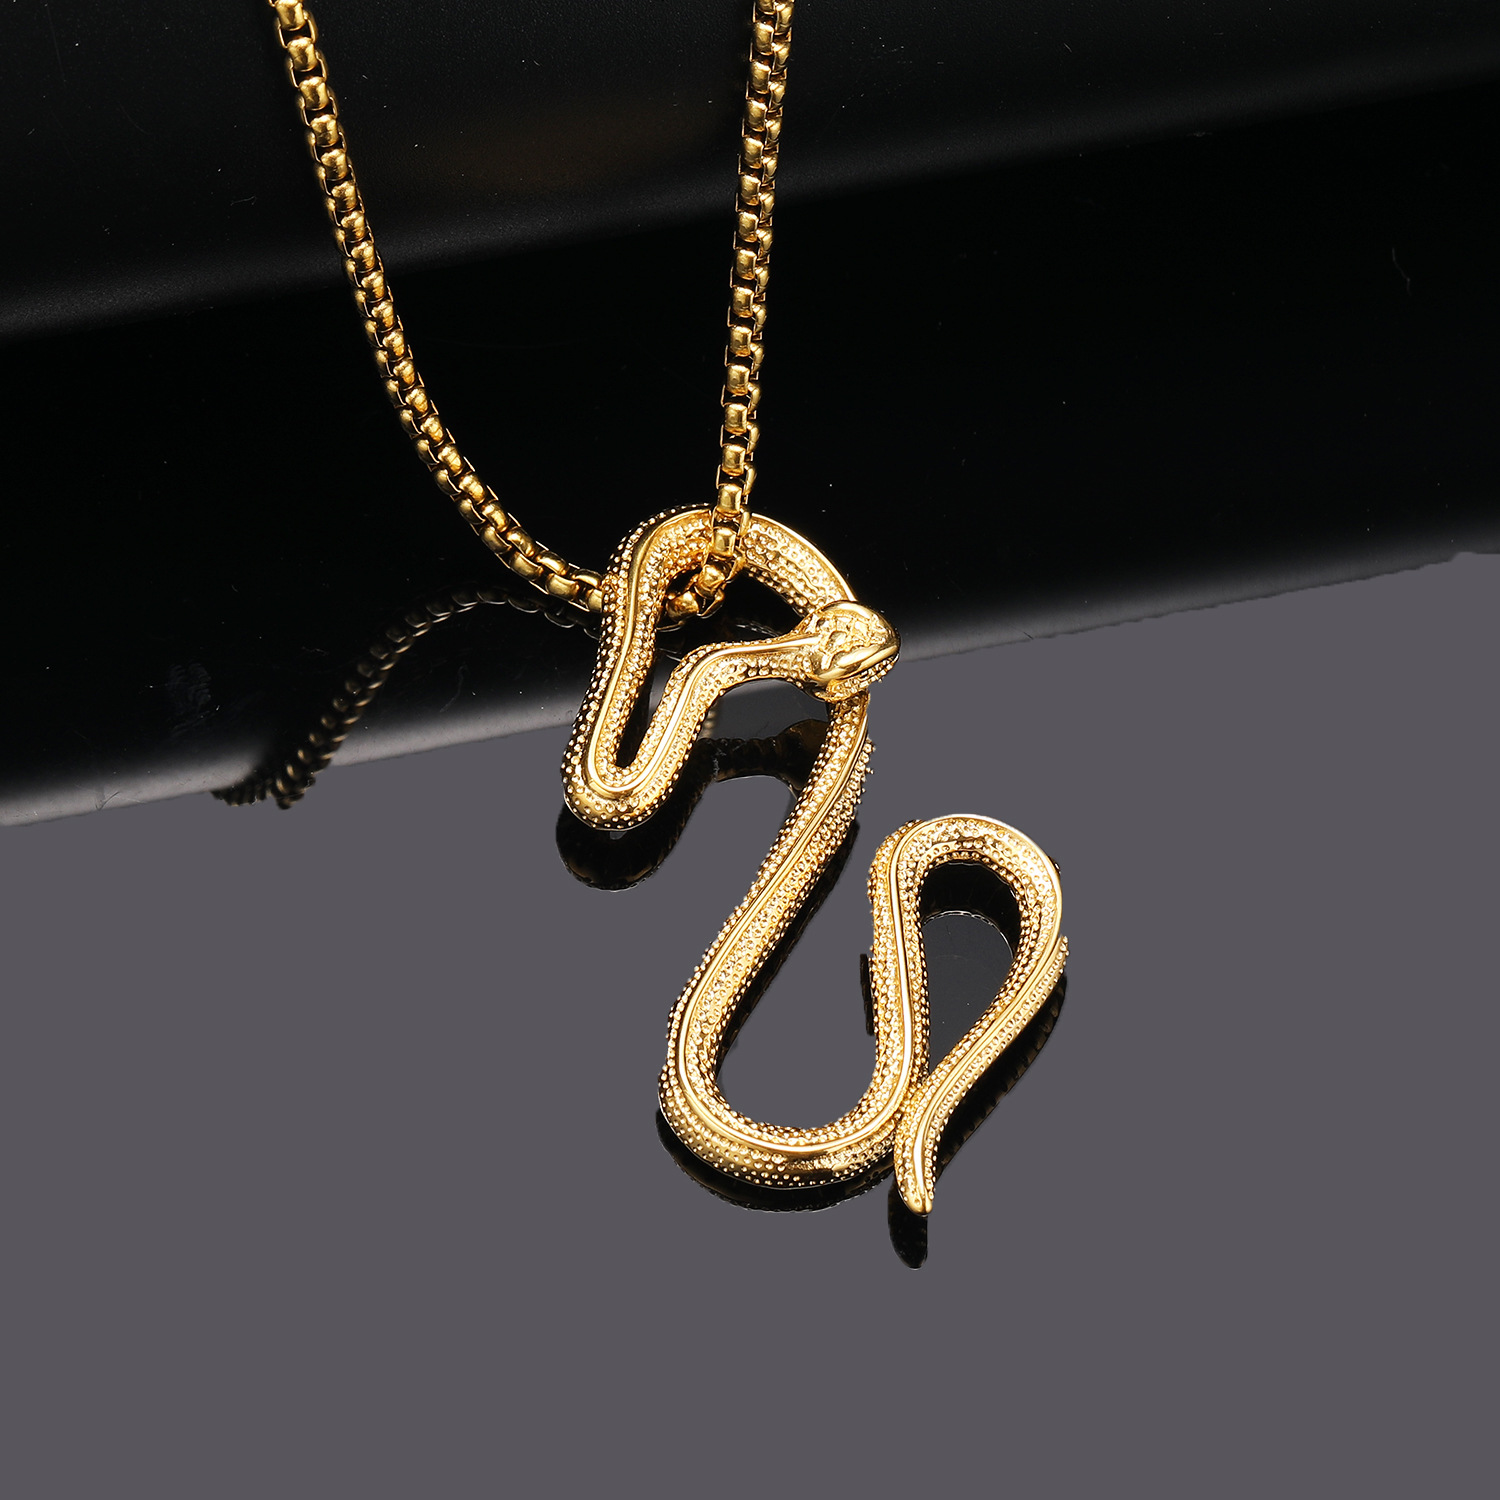 4:Gold pendant and gold 60cm square pearl chain